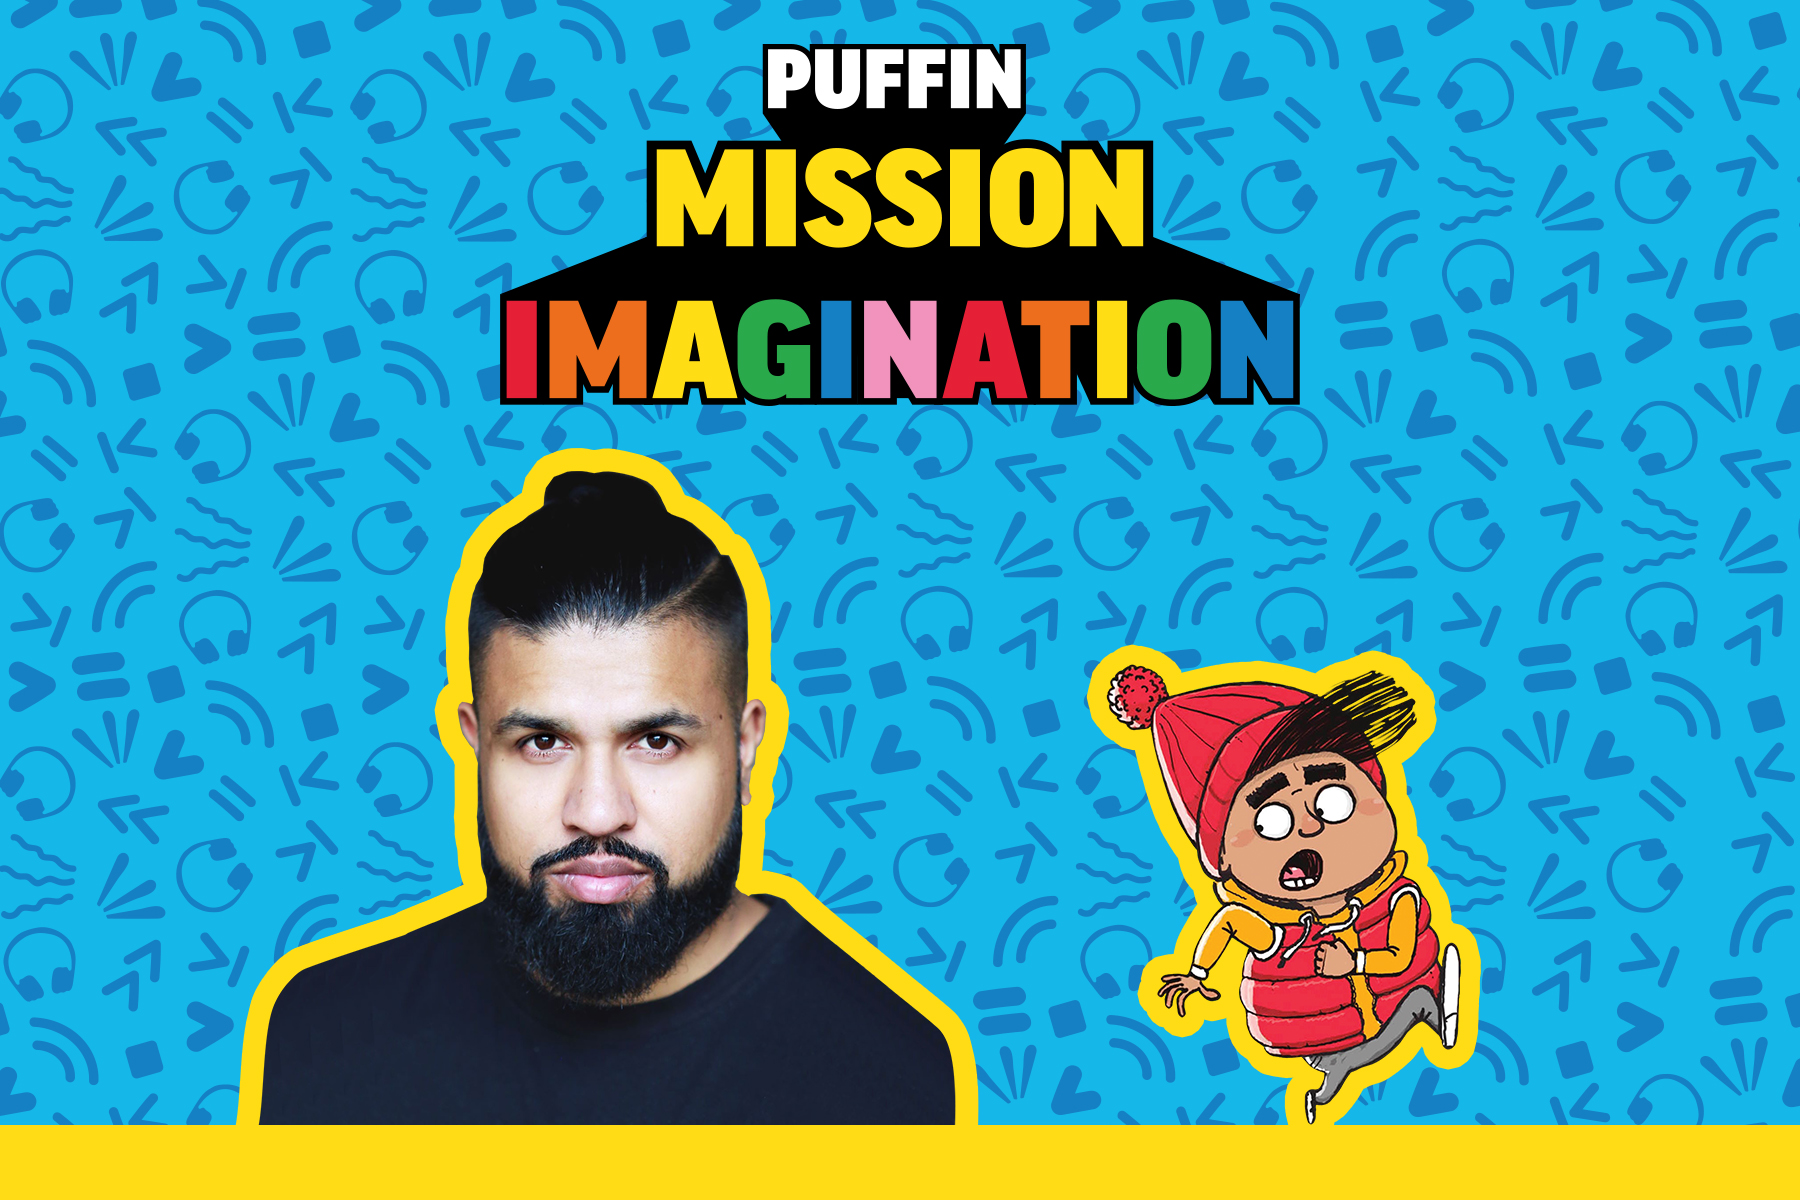 /content/dam/prh/articles/children/2021/july/Article-Card-Mission-Imagination-Podcast-Humza.jpg